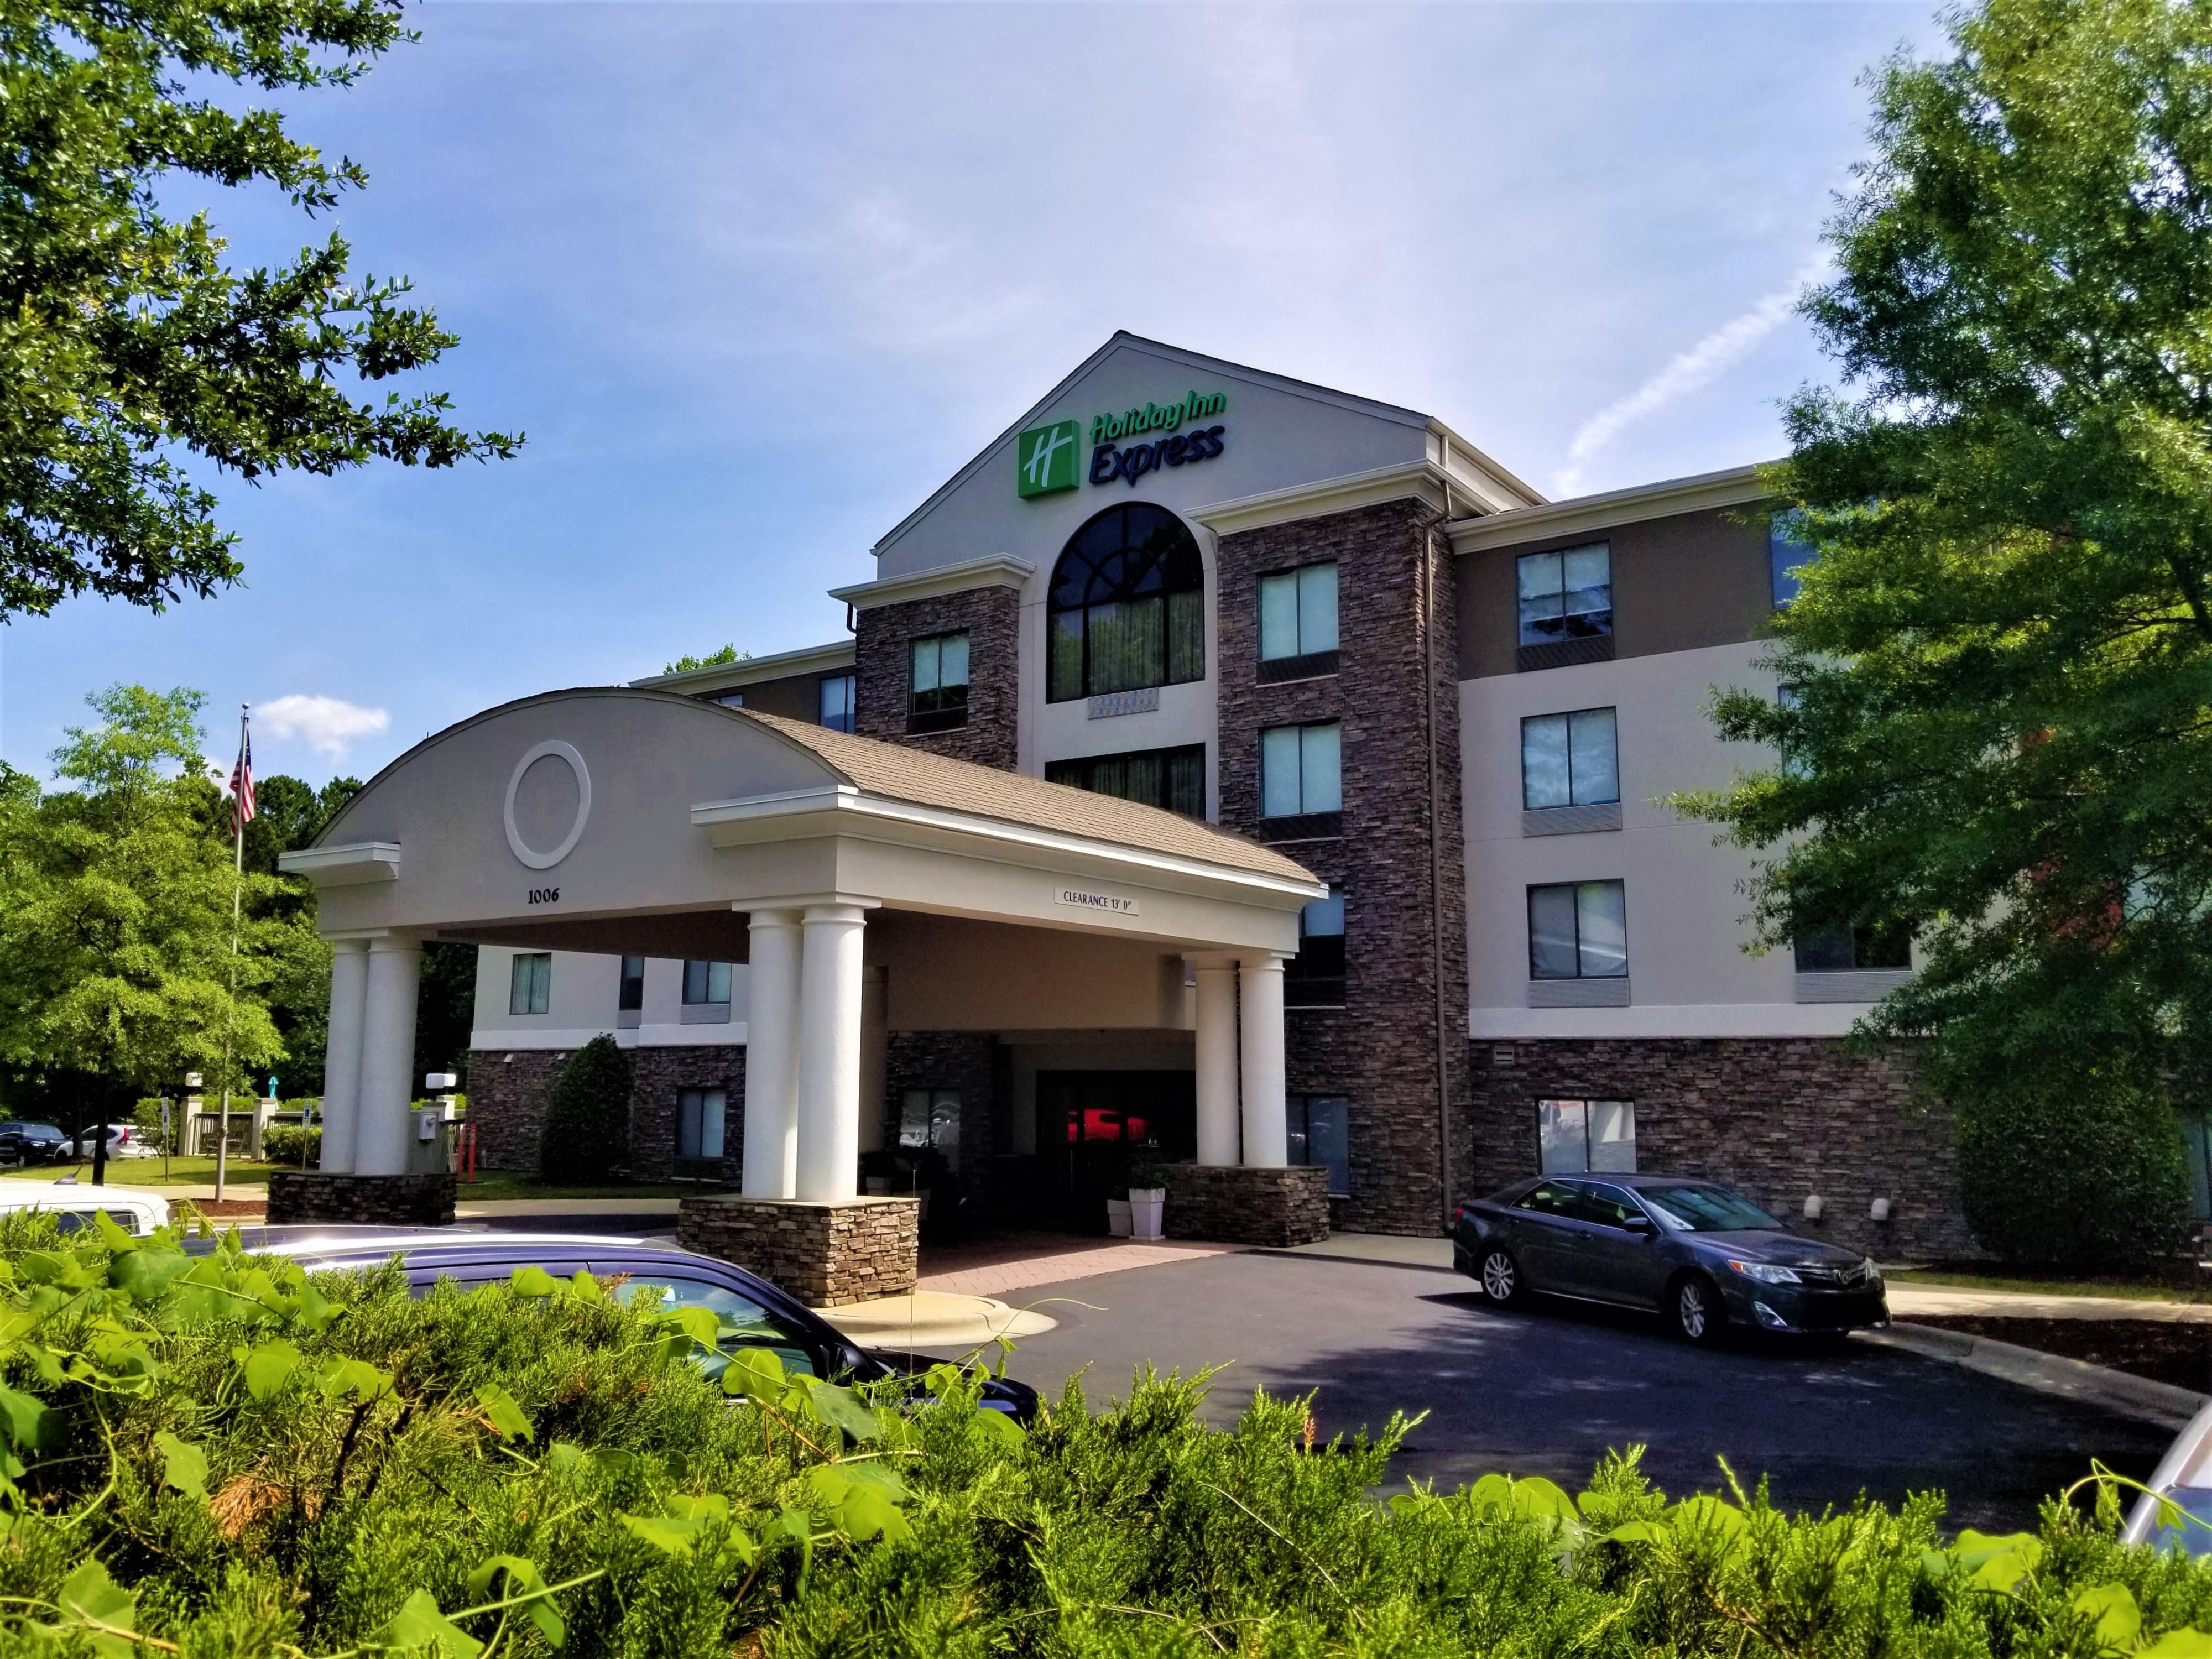 Cary Hotels Top 21 In